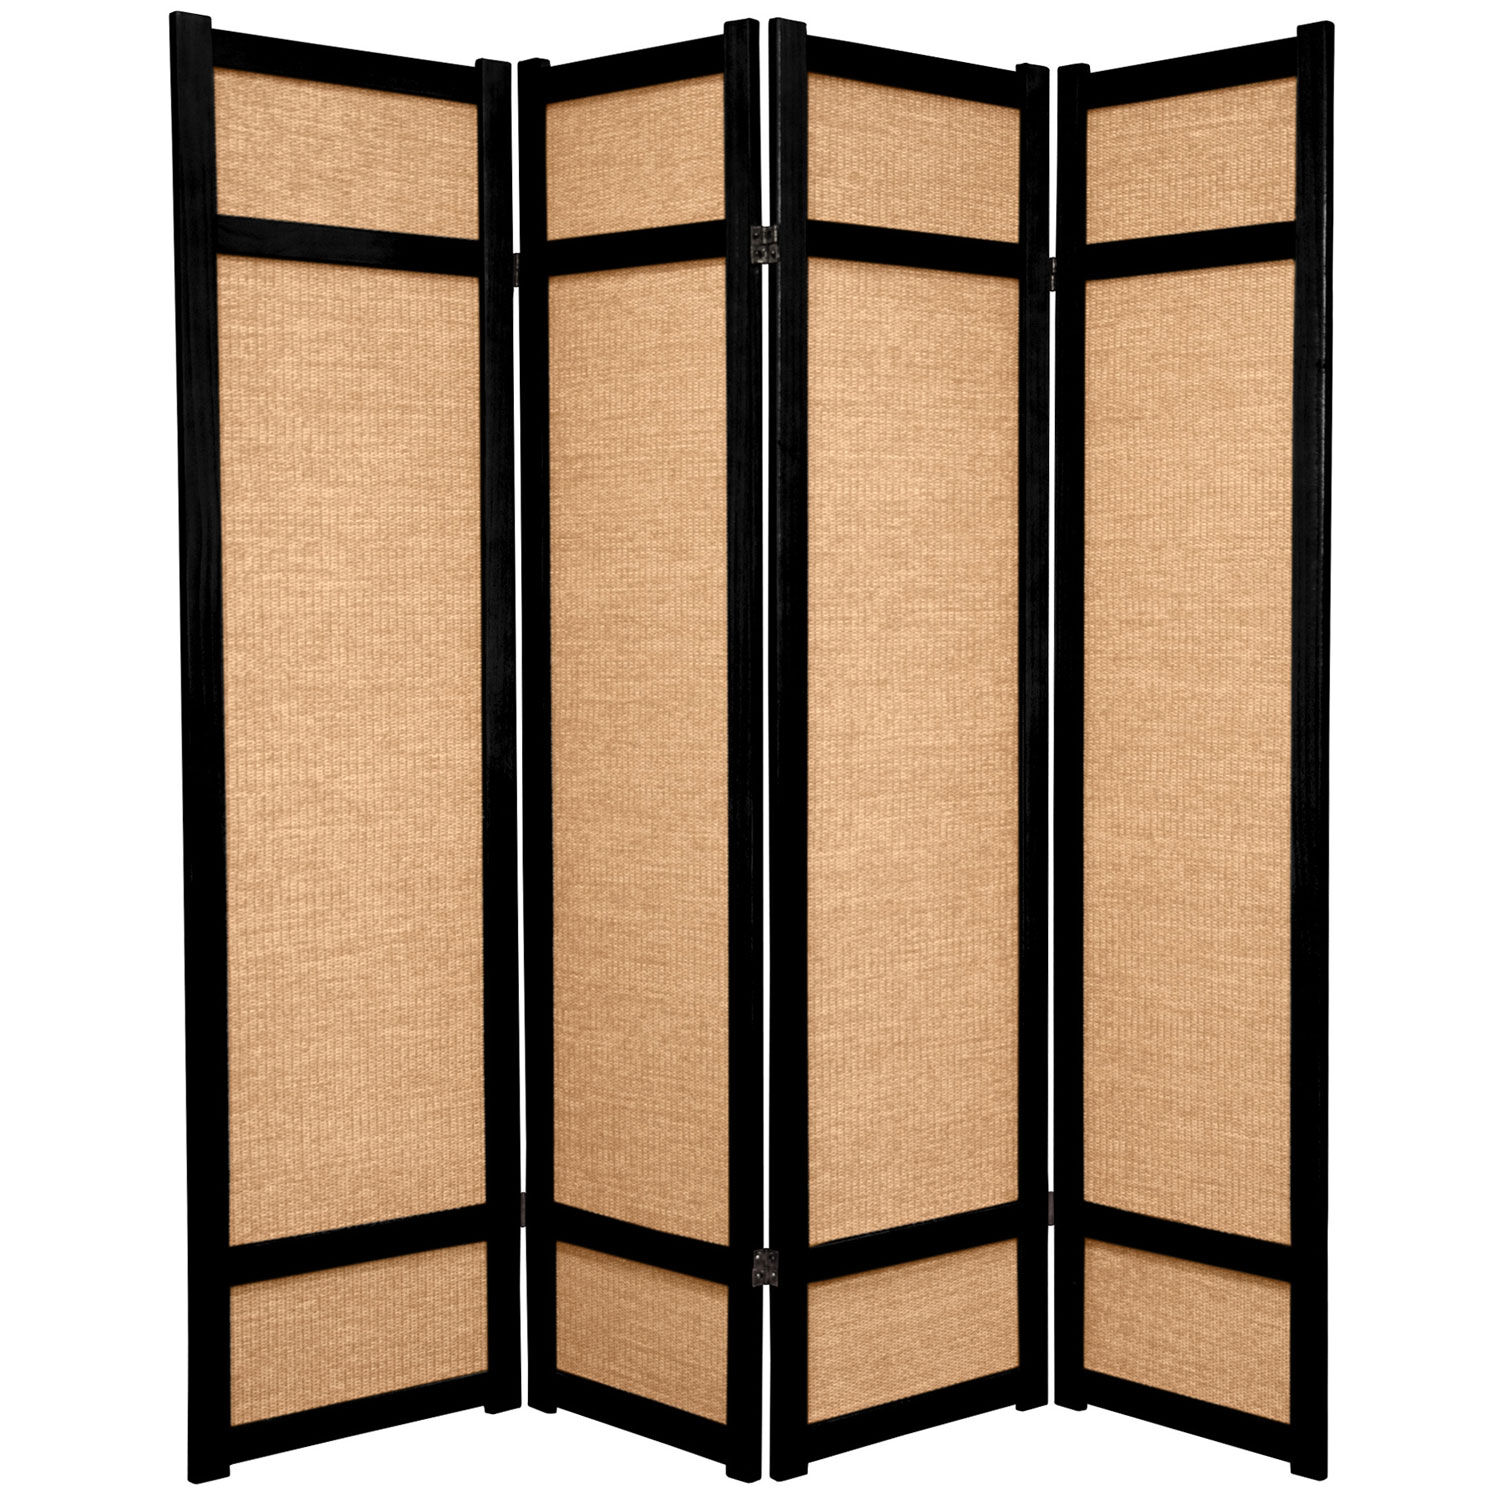 Details about   Decorative Folding Screen room divider partition Spanish wall privacy b-C-0370-z-c show original title 